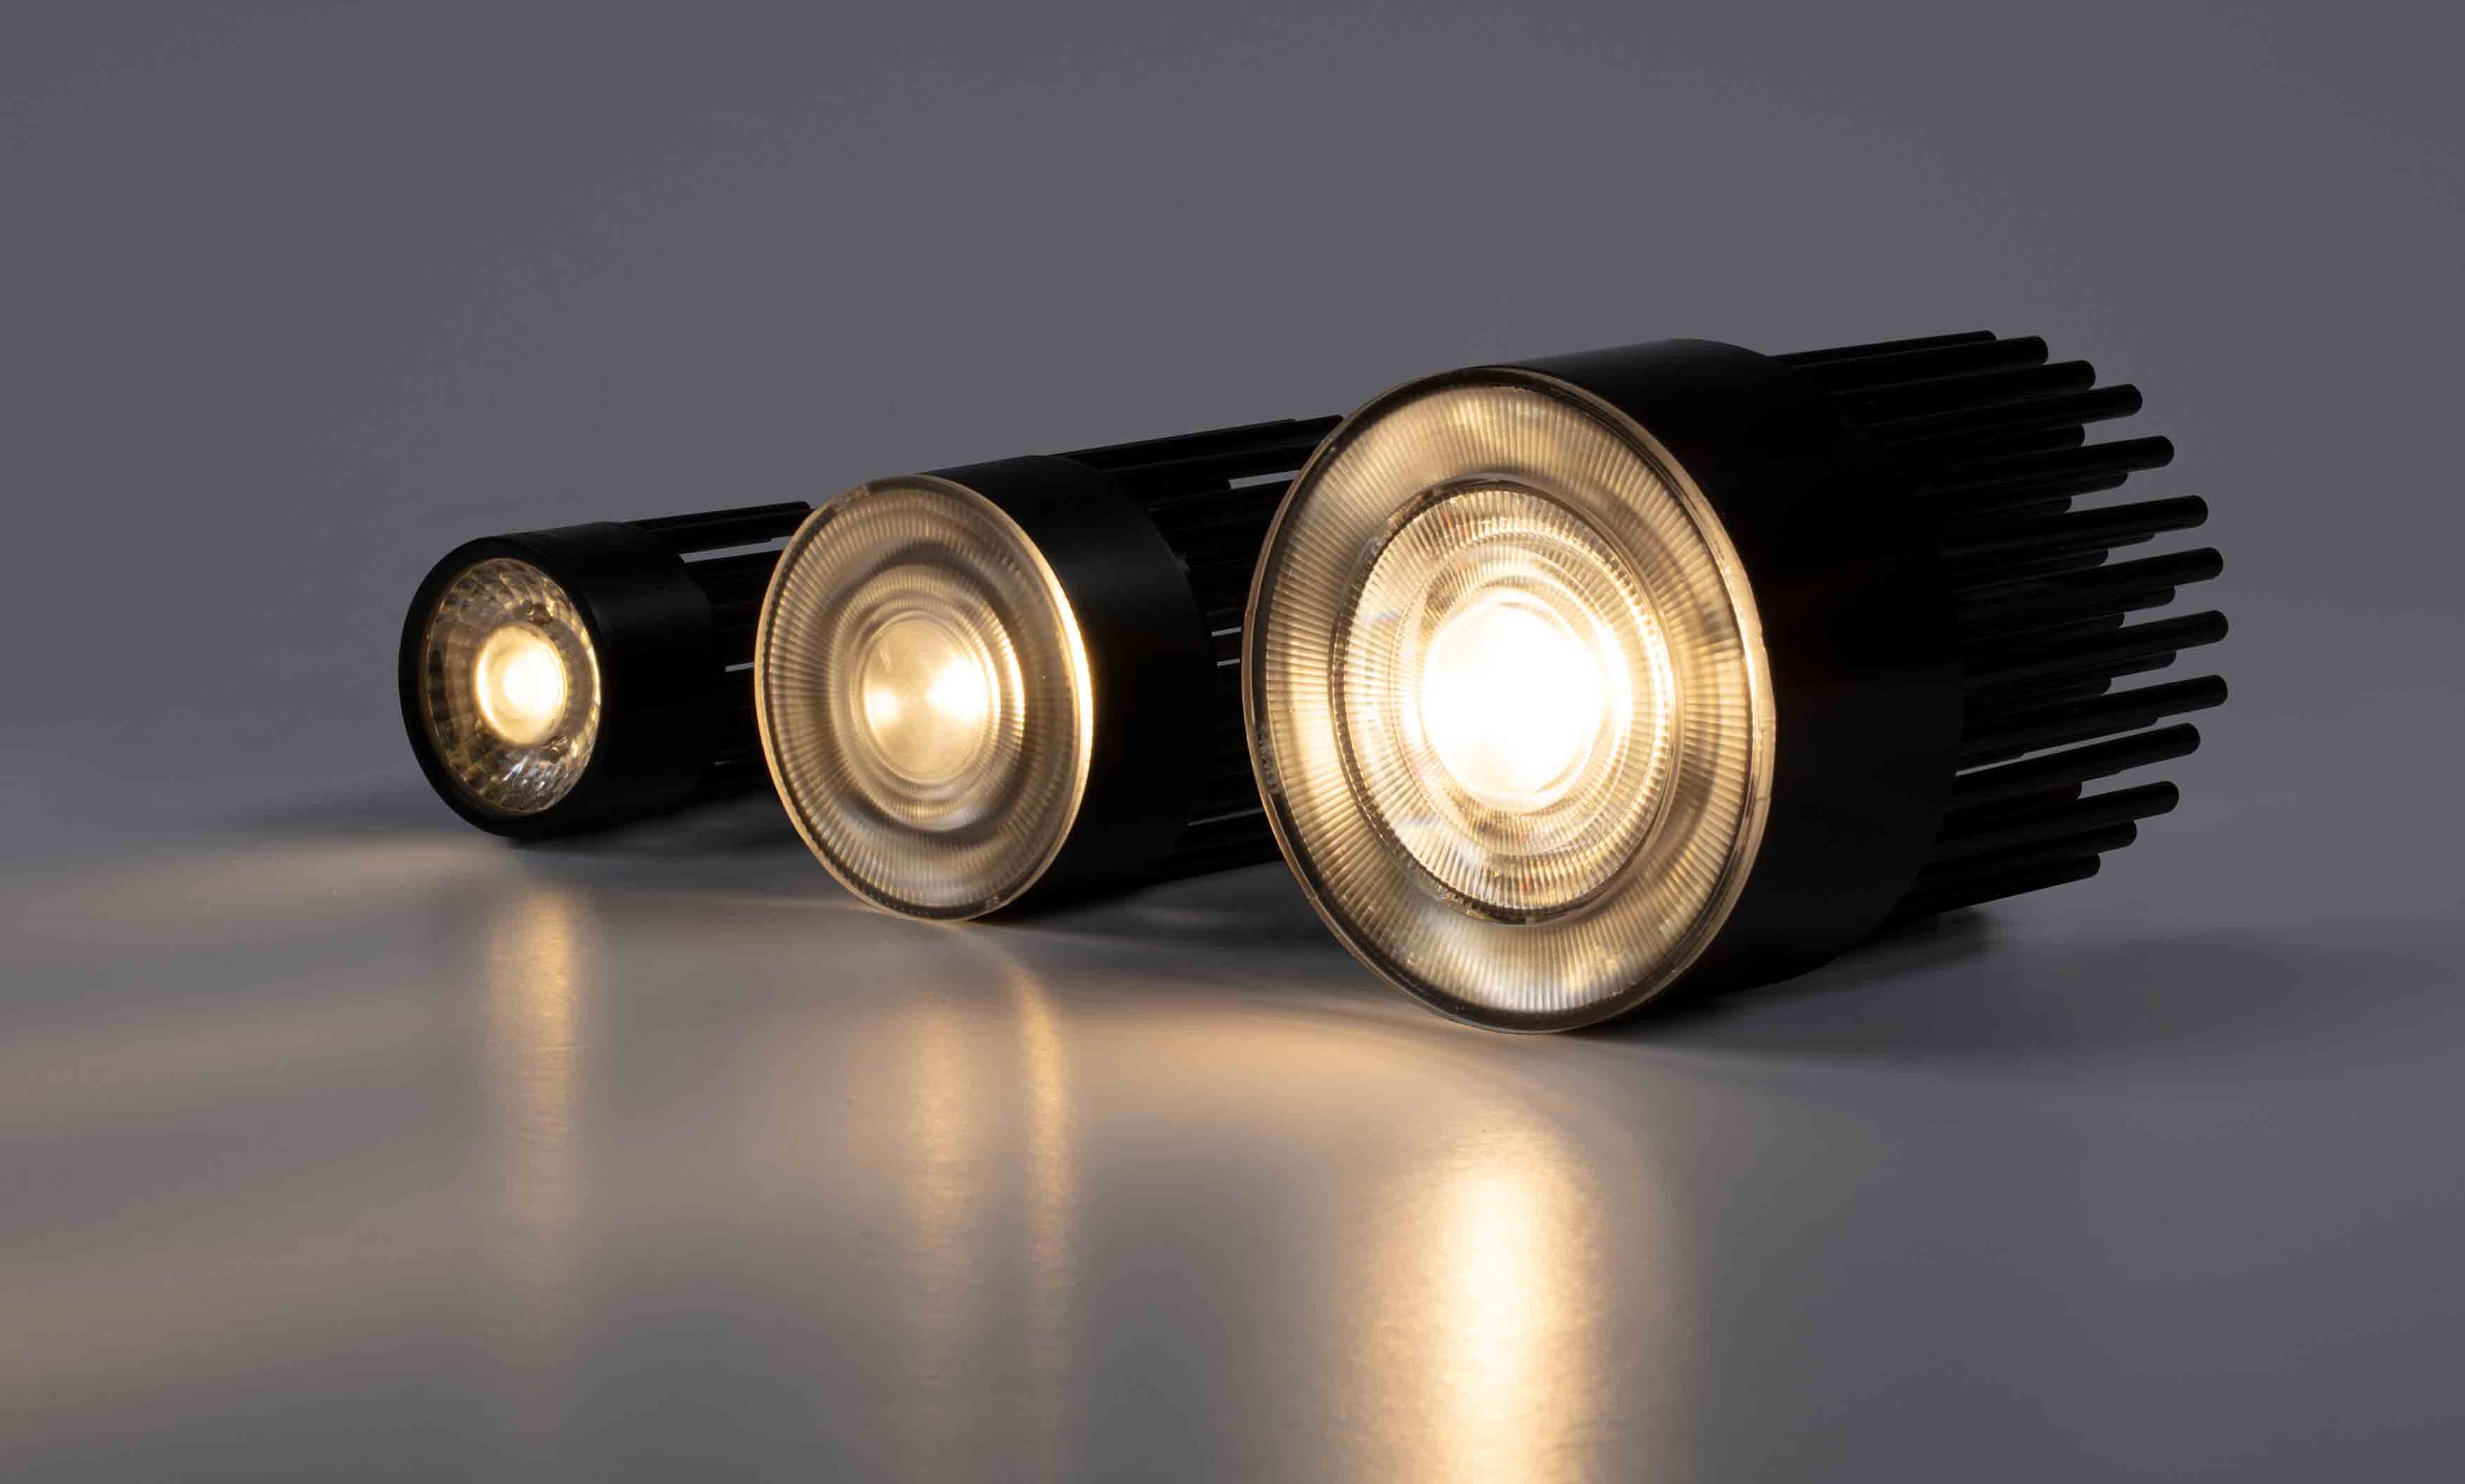 LucentLED Modules → Lucent Lighting